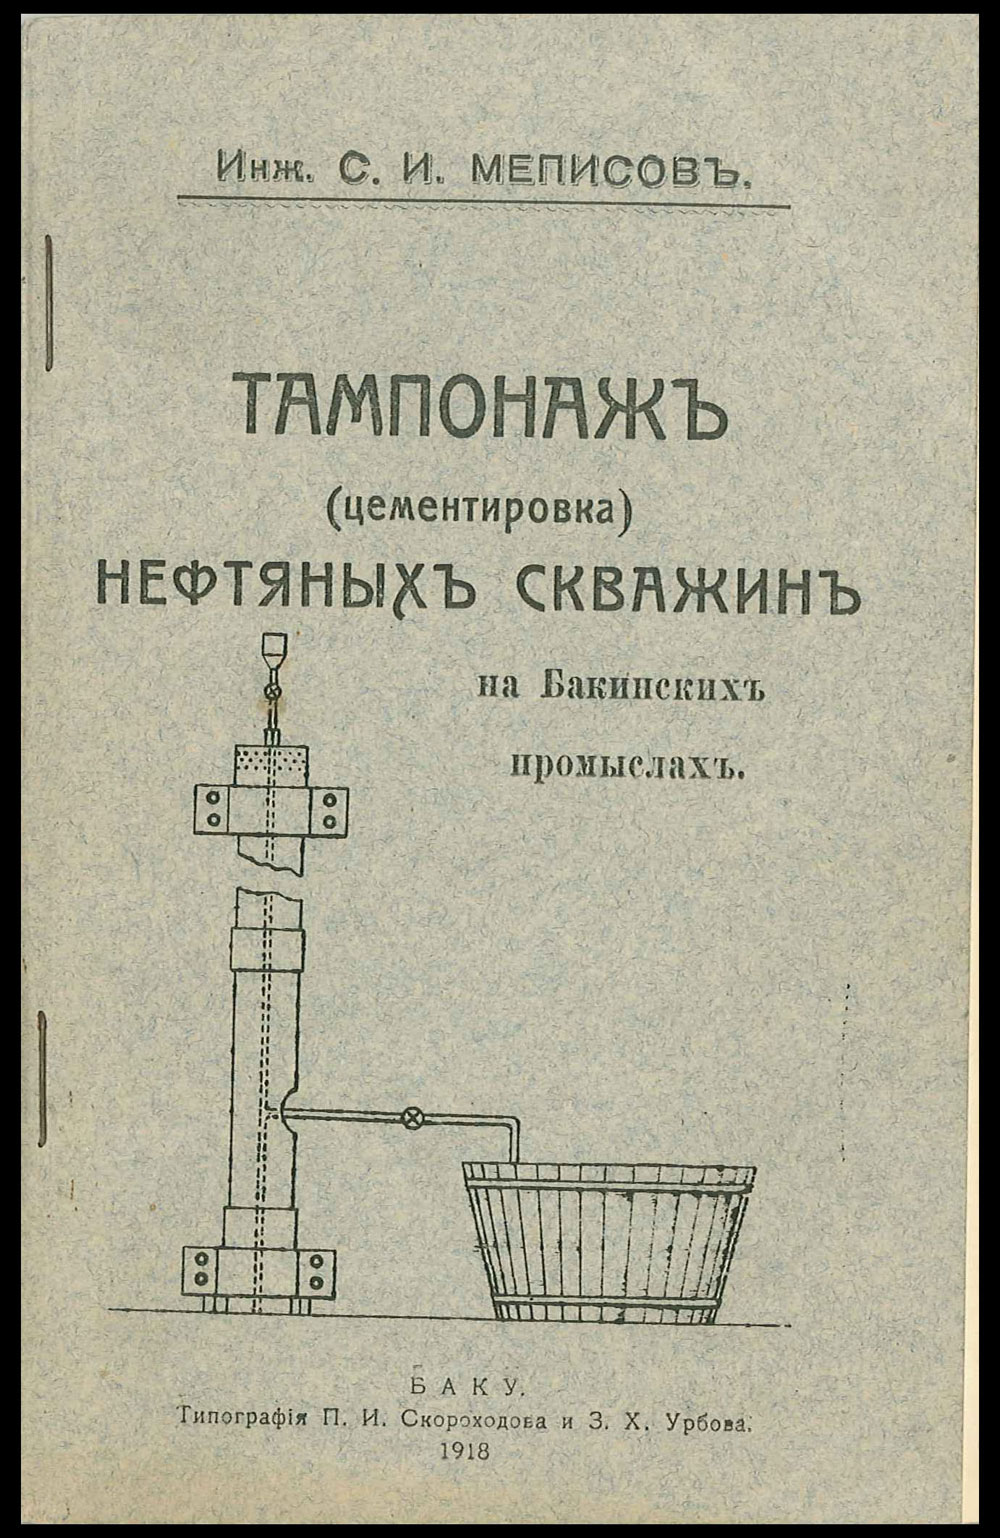 The sealing (cementing) of the boreholes, Mepisashvilis’ first scientific publication of his methods finished in 1917 and printed 1918.